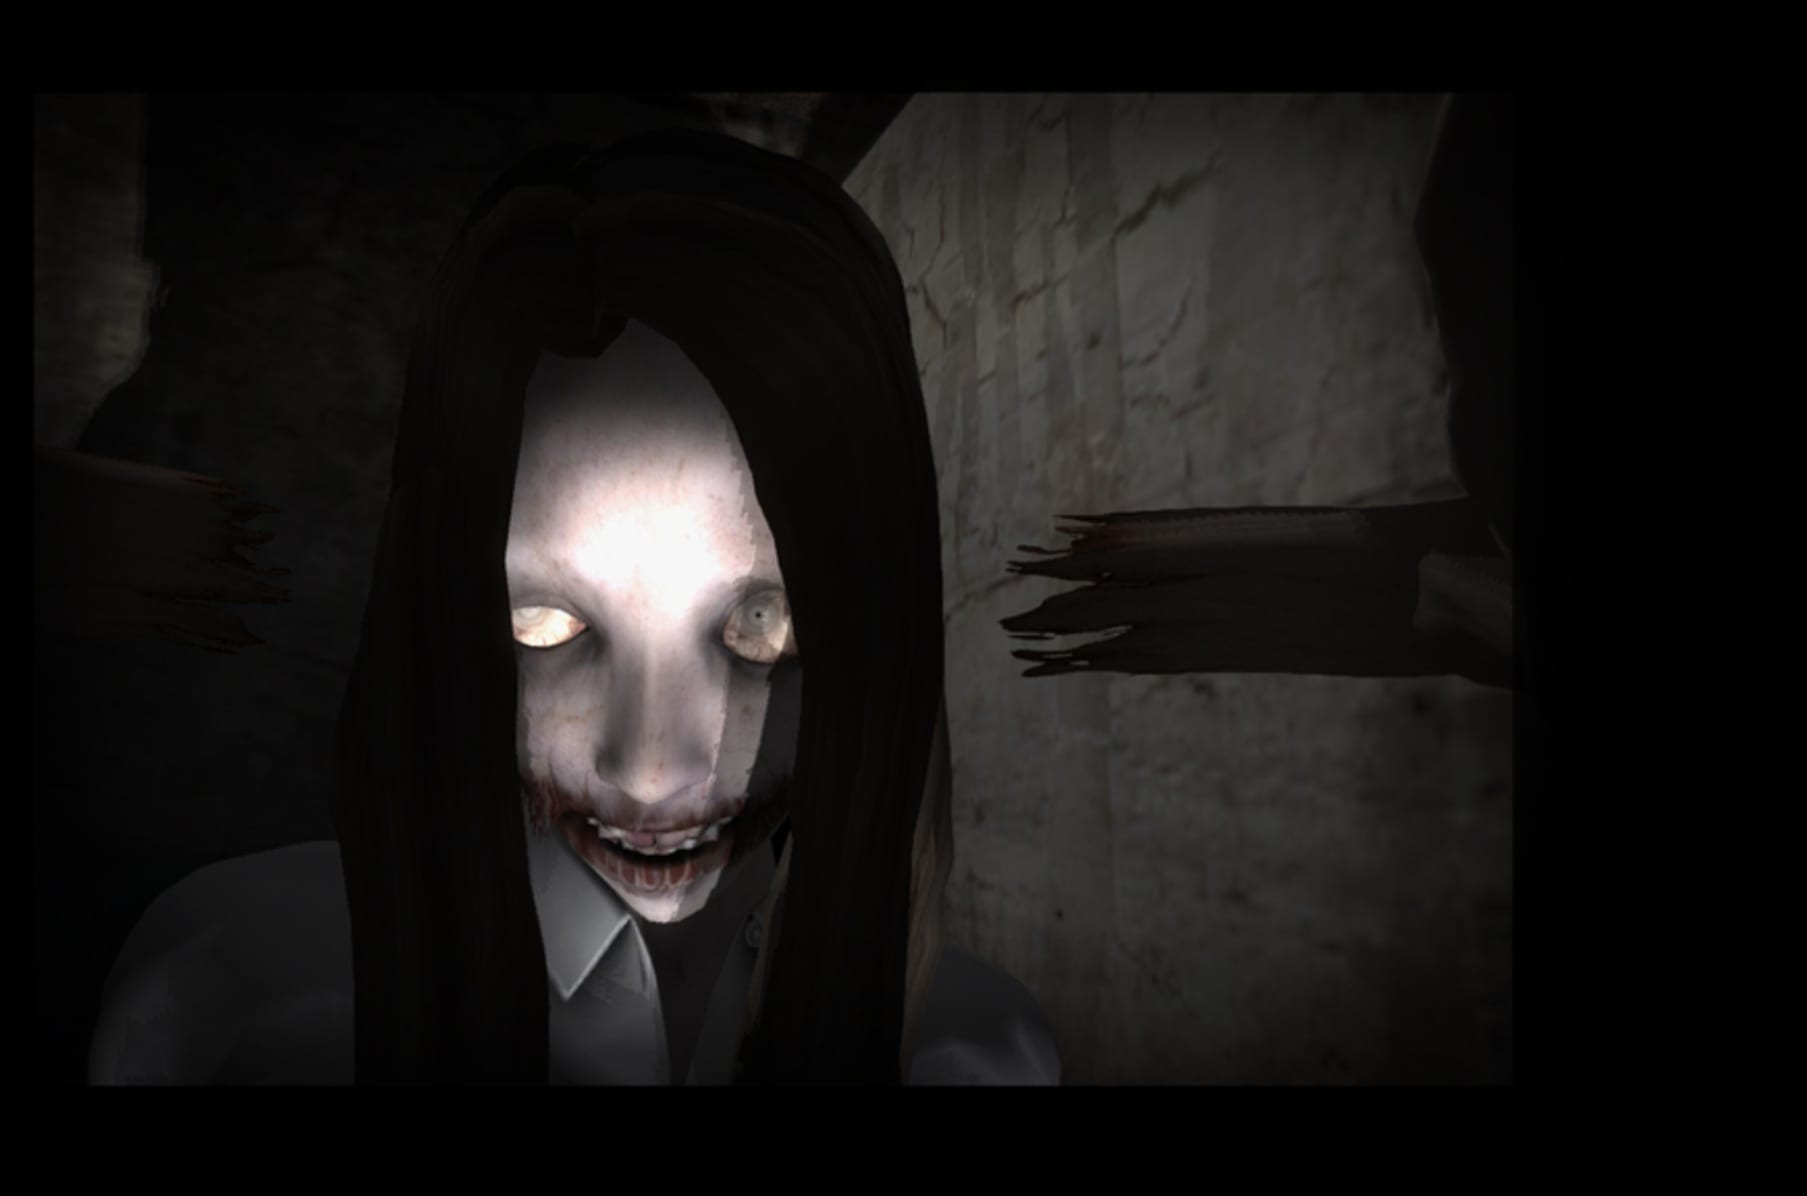 SCARIEST SLENDRINA GAME BY FAR! - Slendrina: The Cellar (PC Version) 